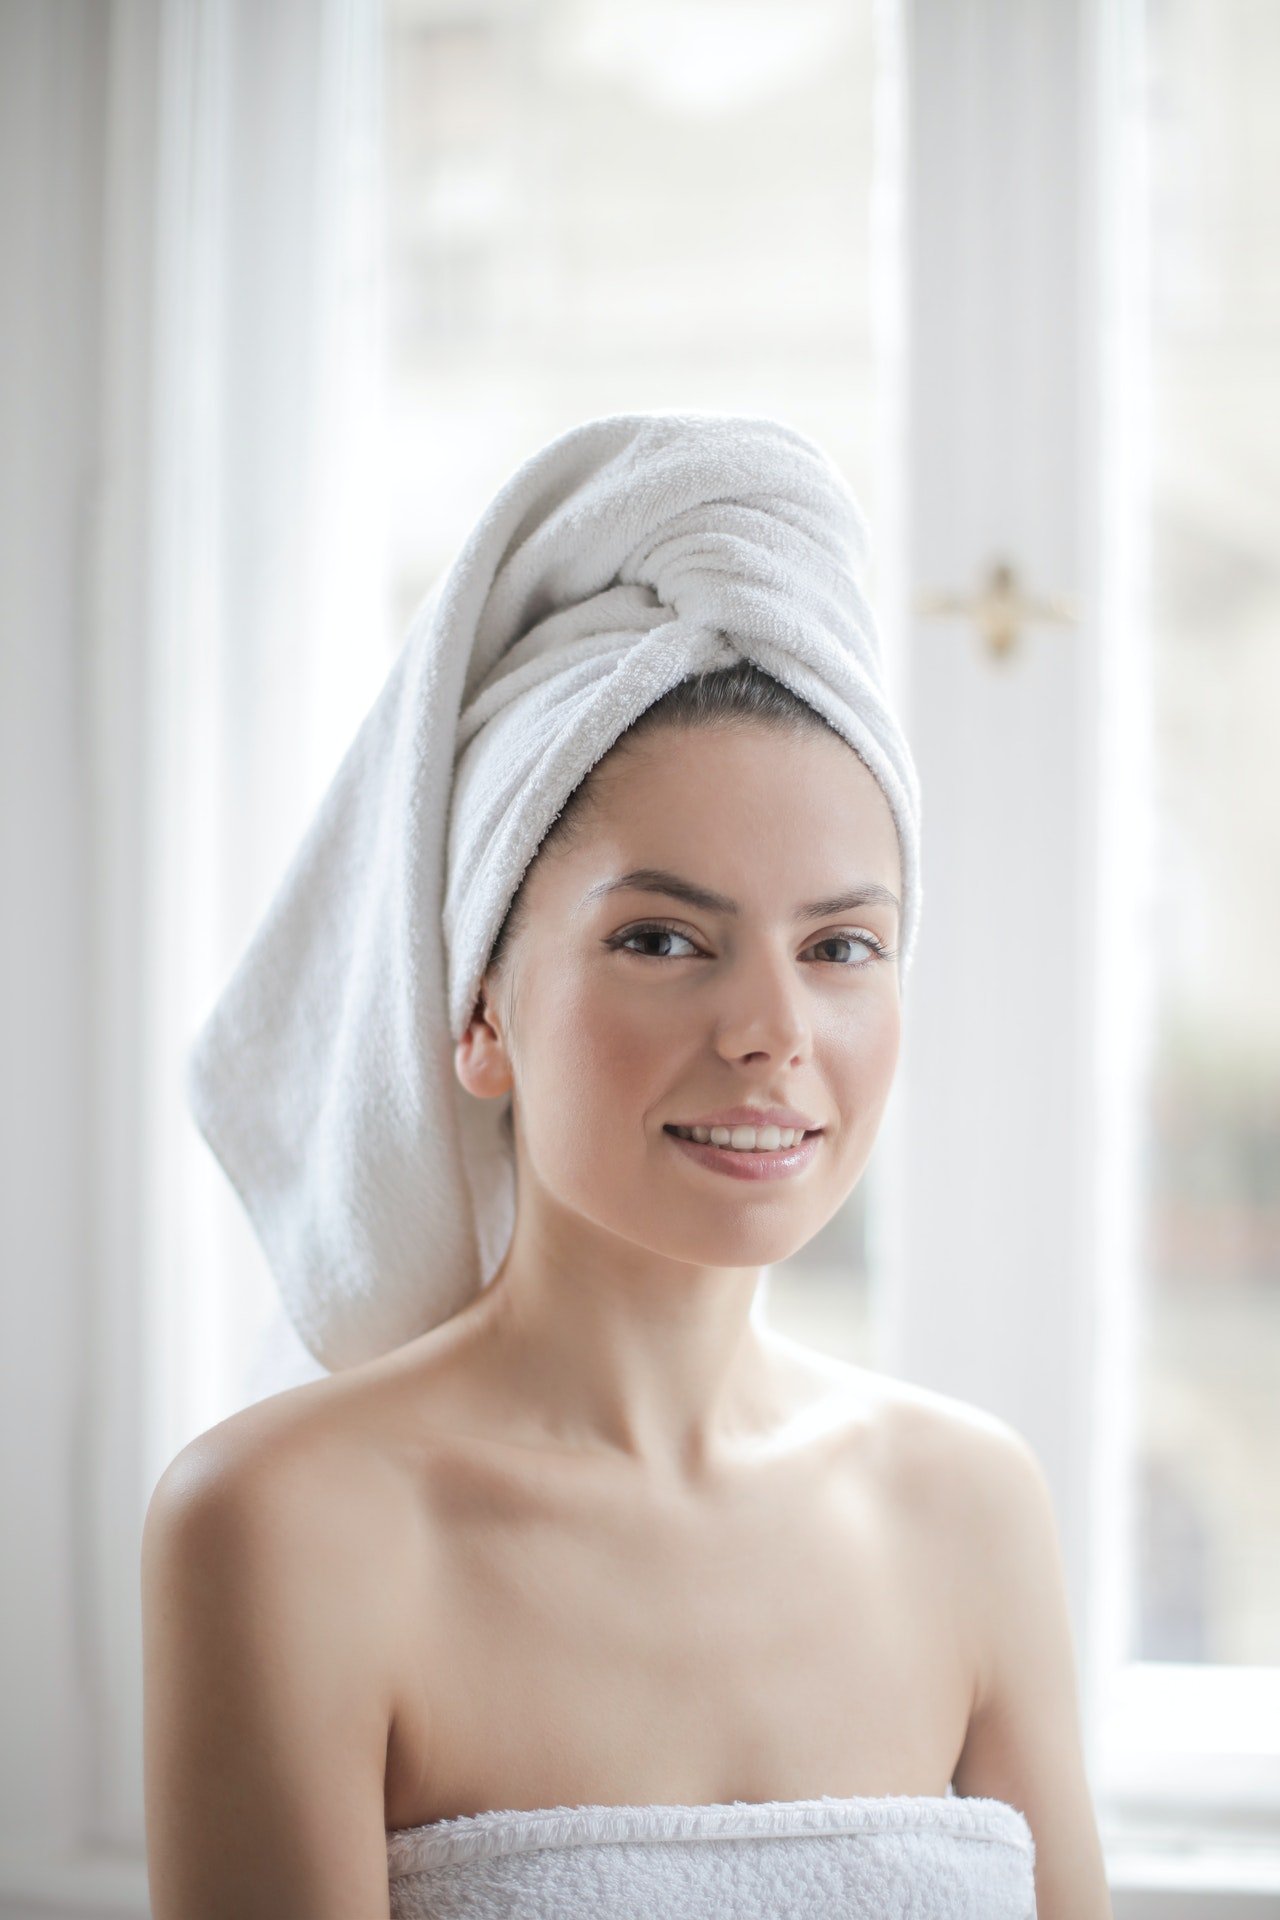 Photo of a woman with white towel on her head | Photo: Pexels